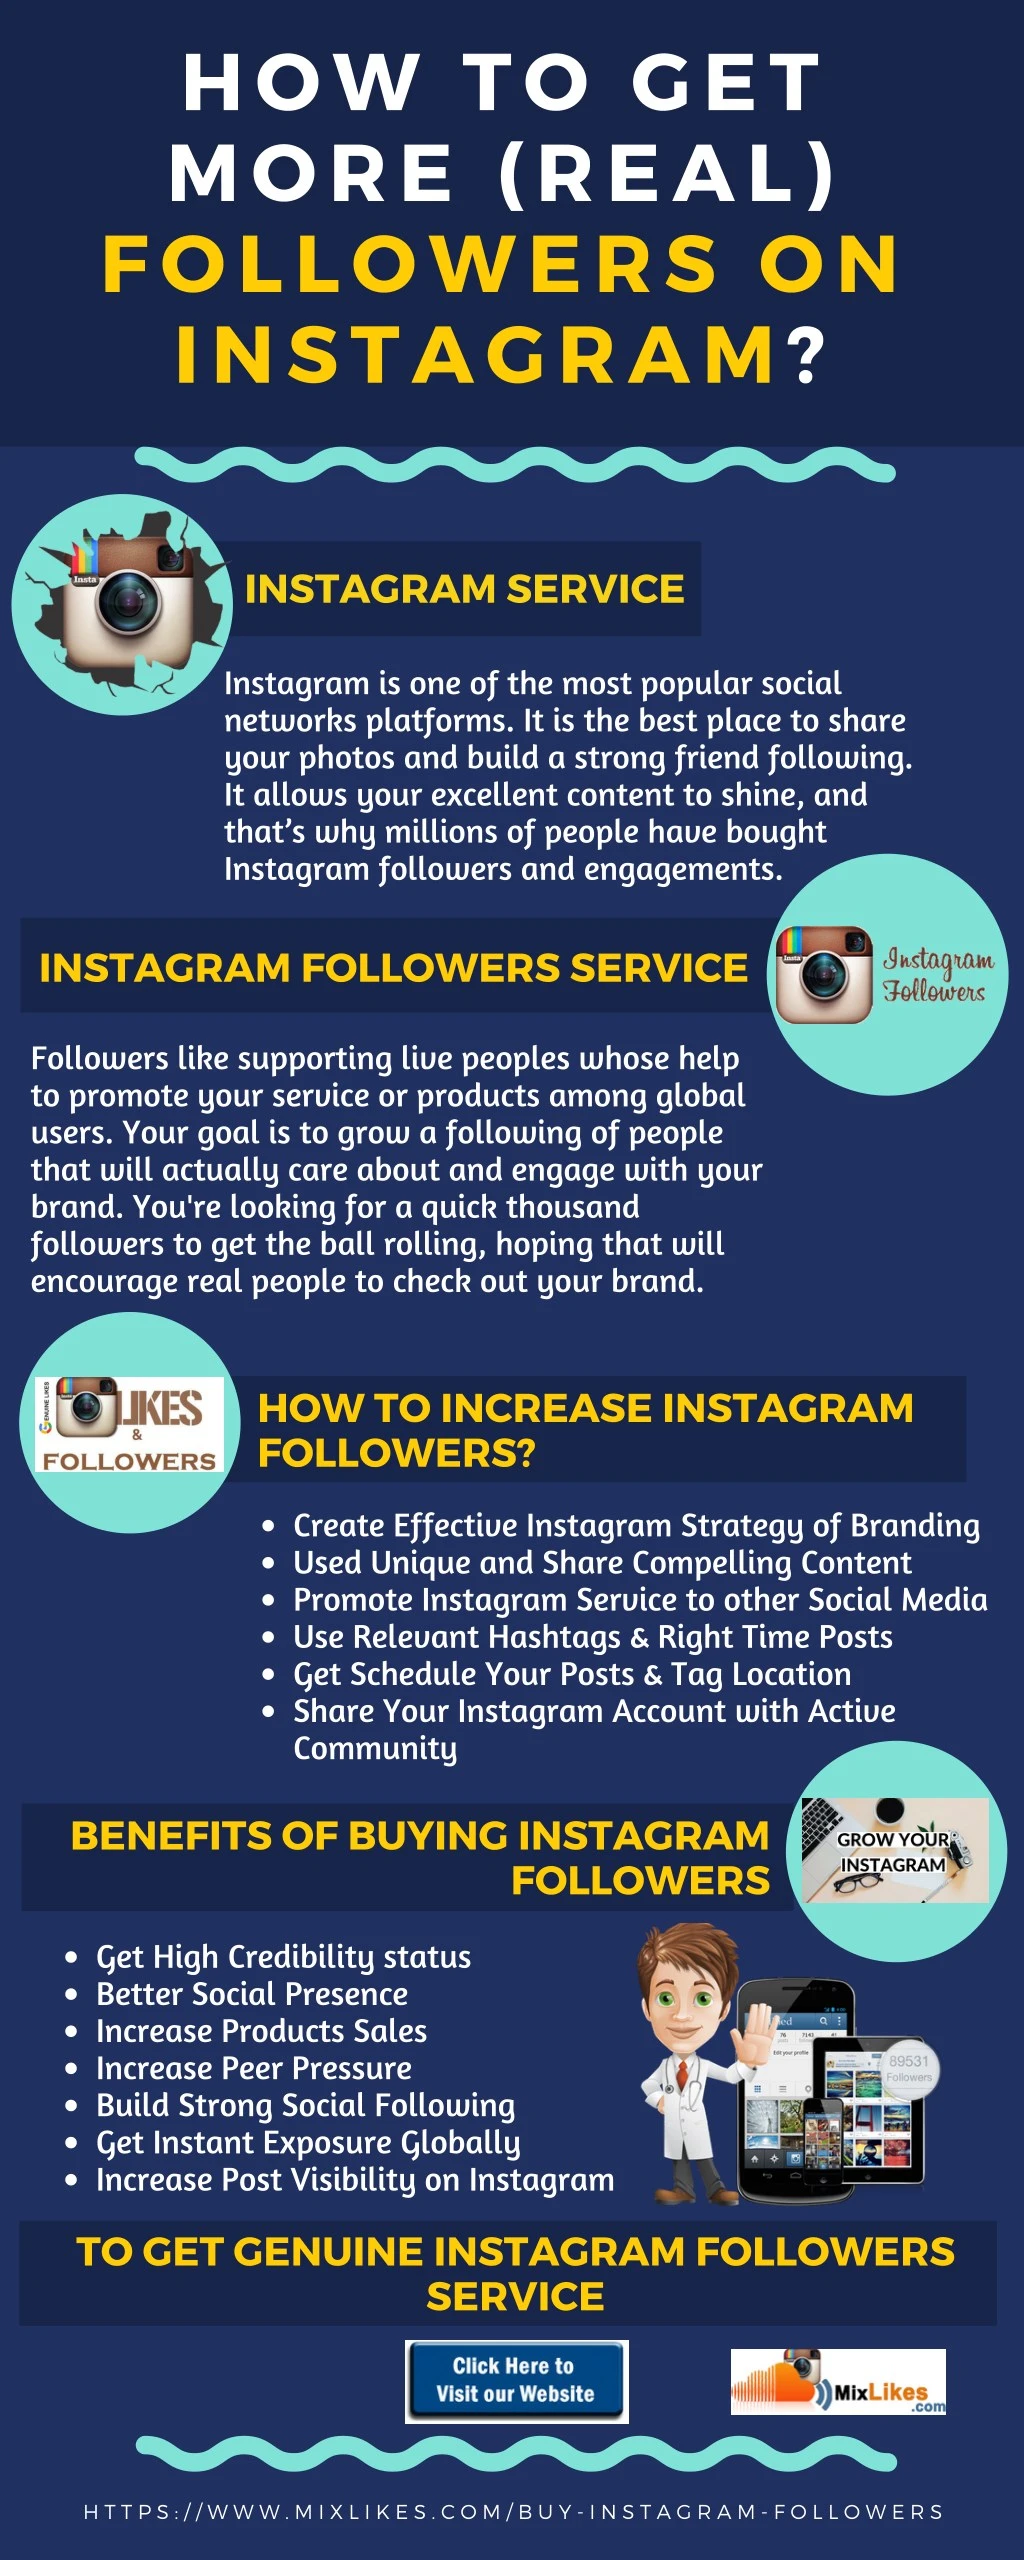 how to get more real followers on instagram